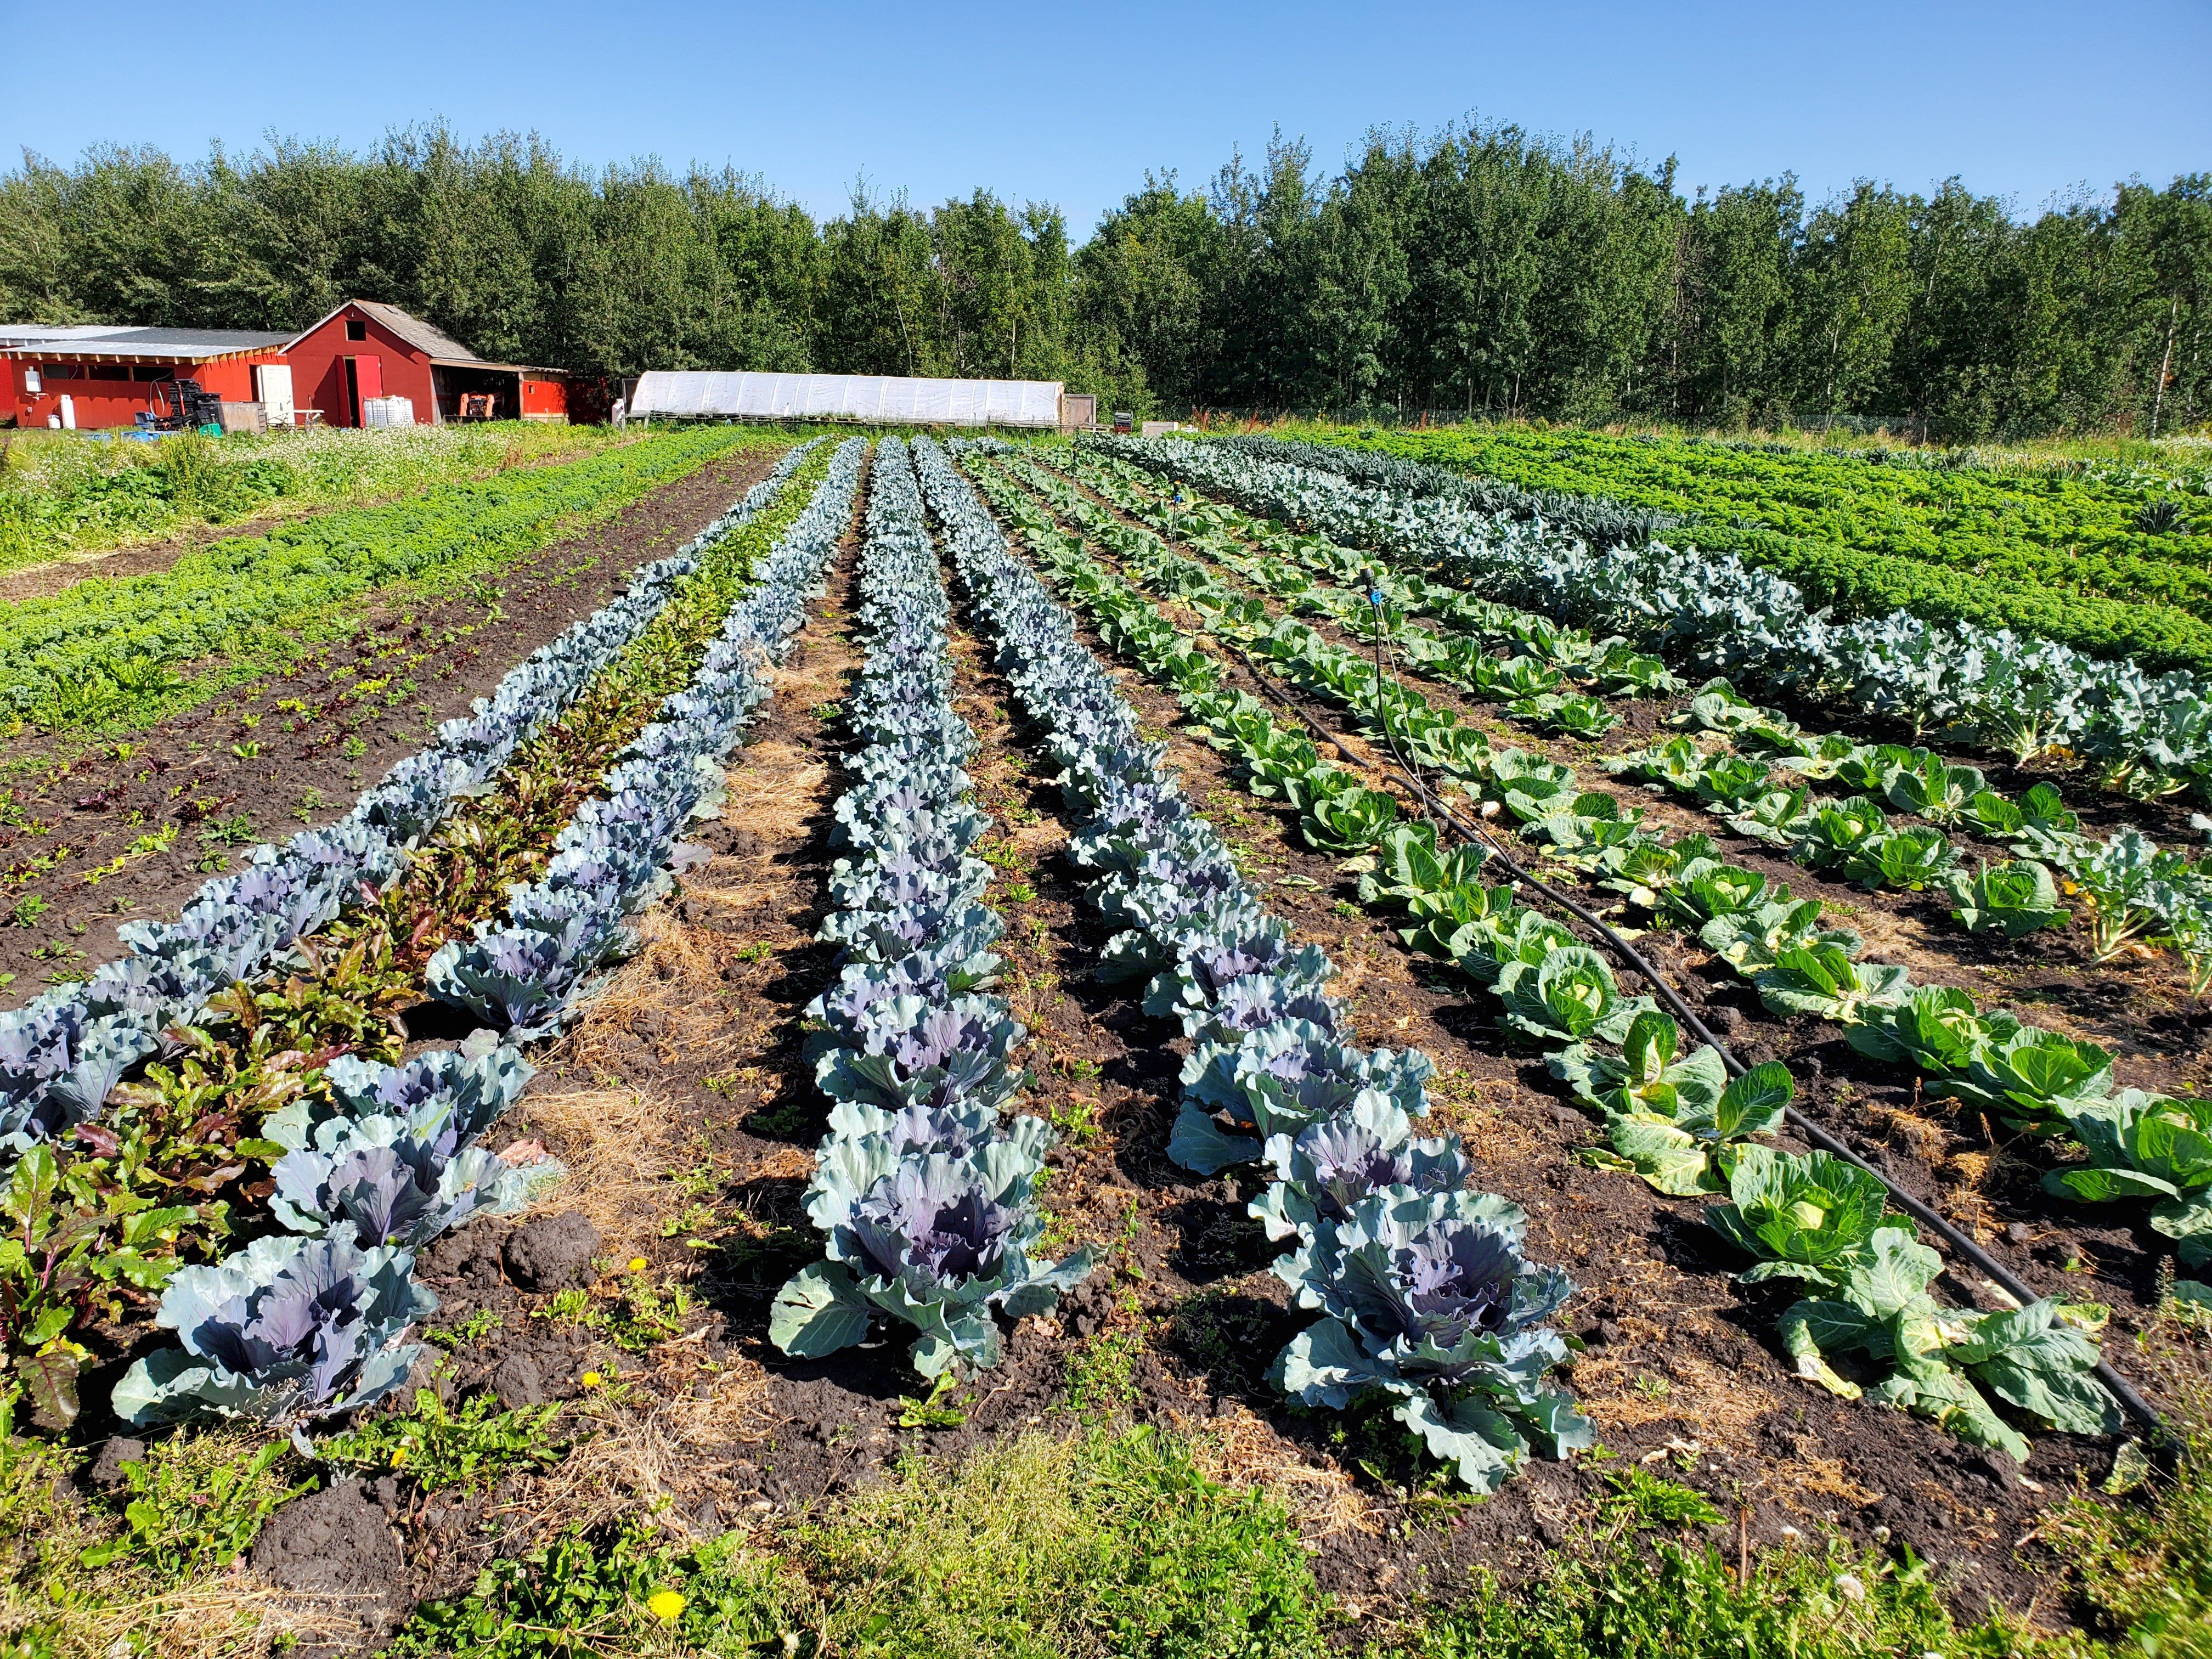 Next Happening: Farm Happenings for August 18, 2020